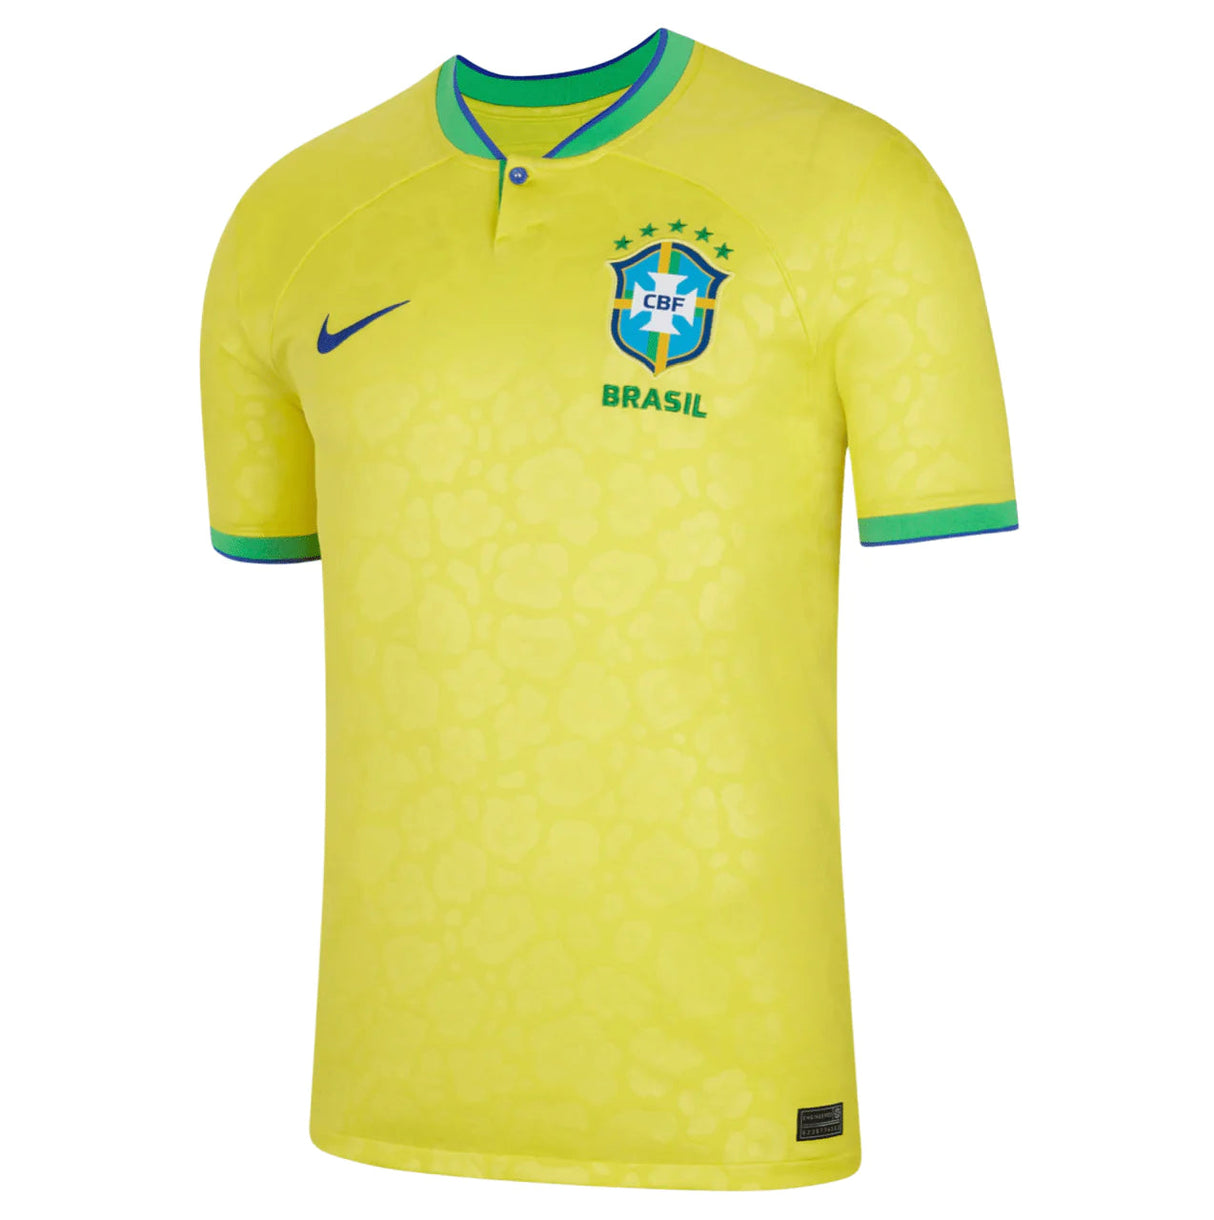 Brazil Jersey - Jersey and Sneakers